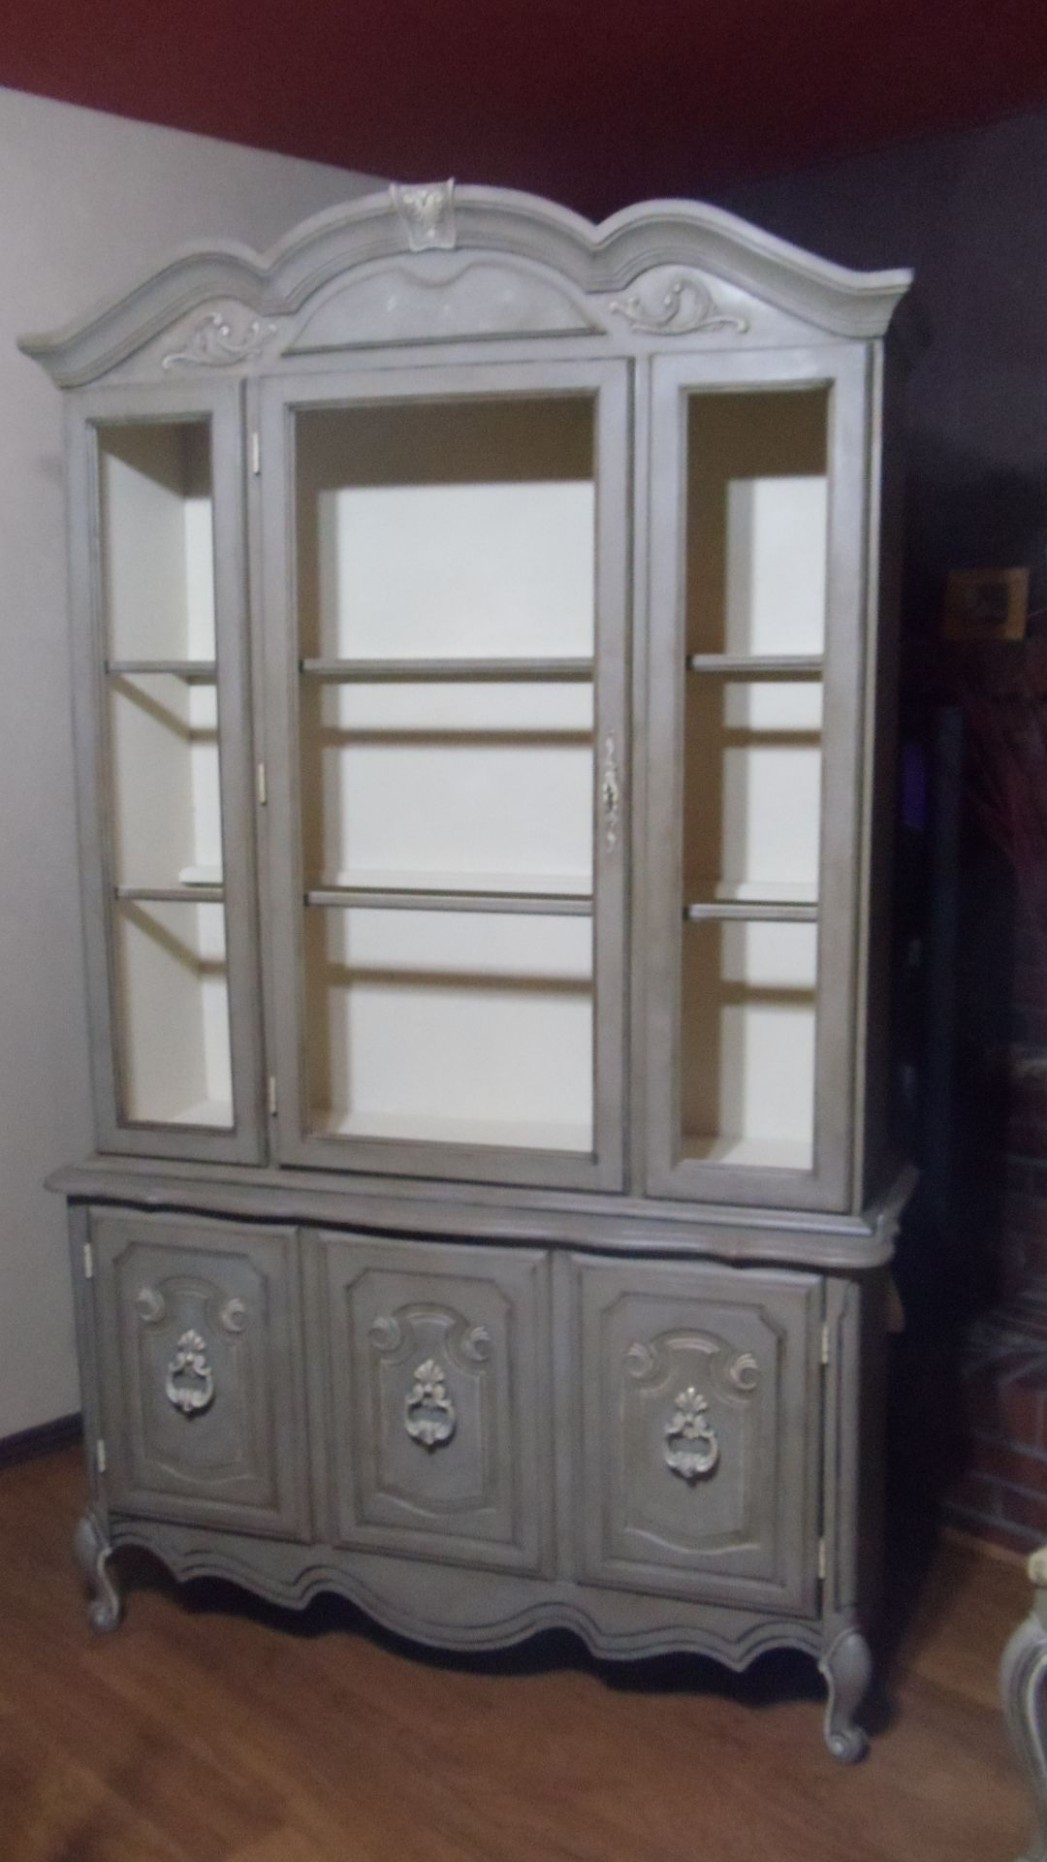 China Cabinet Painted In Annie Sloans Chalk Paint Coco ..